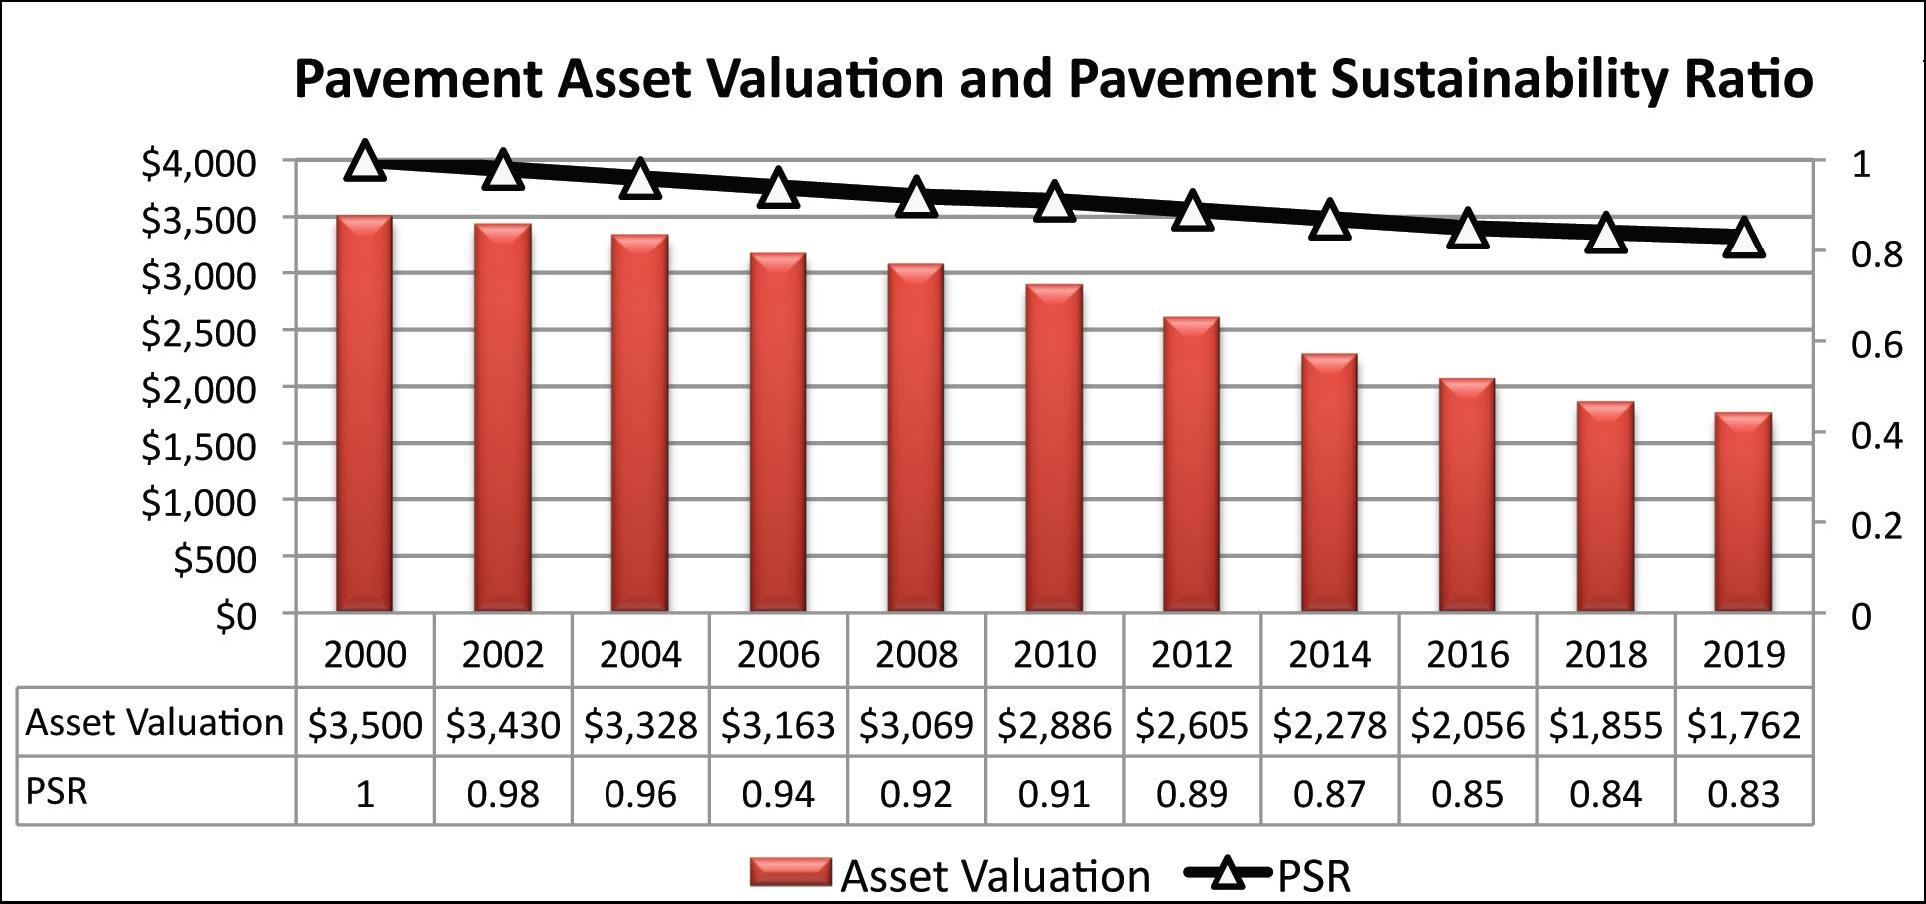 Figure 69 is a repeat of figure 4 that illustrates how the Asset Sustainability Index and asset valuation can be used in complementary ways to illustrate the consequences of highway investment over time. Figure 69 includes a bar chart from 2000 through 2019 with the bars gradually declining as the value of the roadway assets decline. In Figure 69, the asset value bars gradually decline from a high of three point five billion dollars in 2000 gradually falling to a value of one billion seven hundred and sixty-two million by 2019.  Shown on a second axis is a trend line of the Pavement Sustainability Ratio falling from a high of 1.0 in 2000 to point eight three in 2019. The chart illustrates how the asset valuation calculation and the pavement sustainability ratio used together can show that as the level of investment decreases relative to need that the value of the assets decline. After 20 years, the agency has lost almost half of the value of its rural pavement inventory. 